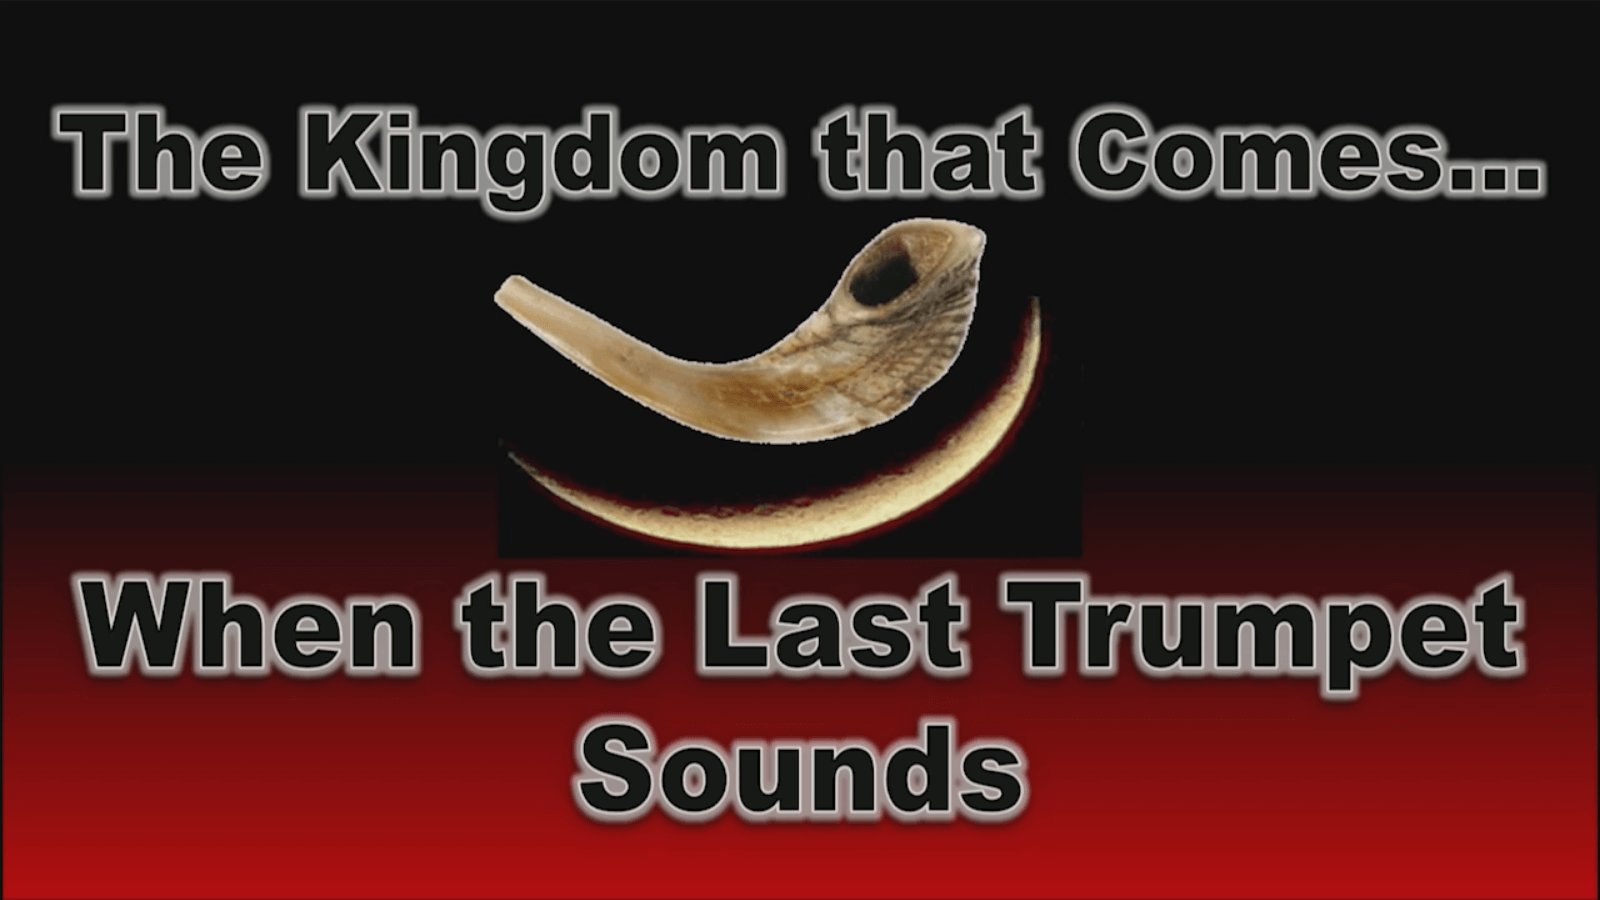 The Kingdom that Comes with the Last Trumpet Sounds